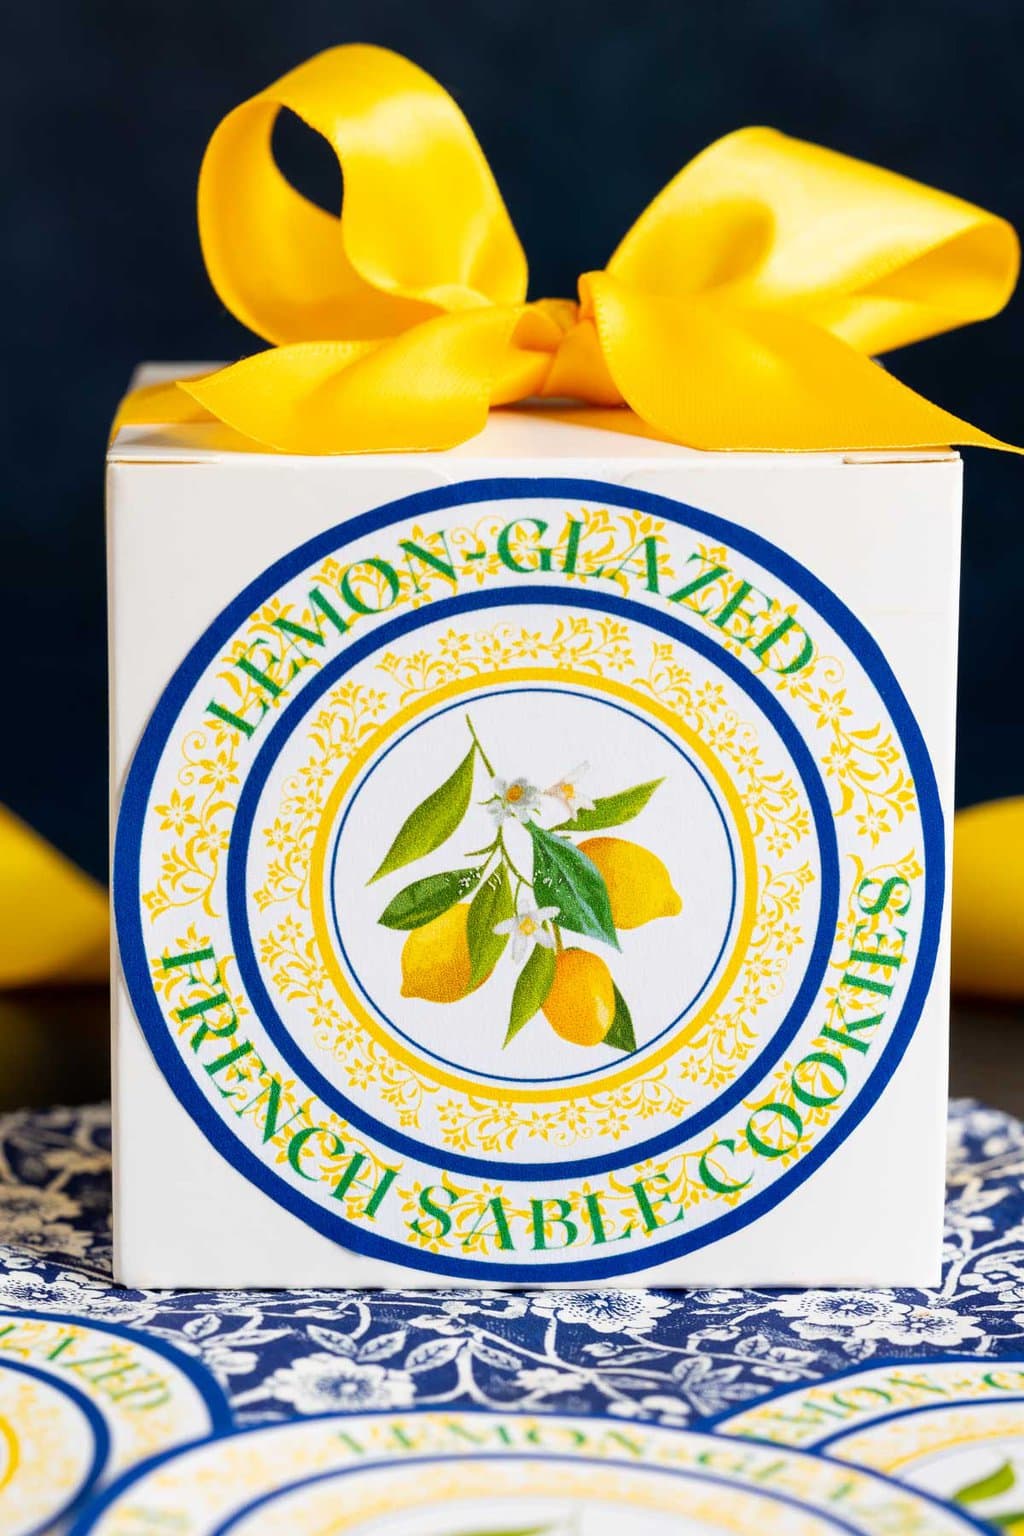 Vertical closeup photo of a custom Lemon-Glazed French Sable Cookie gifting label on a box with a yellow bow.